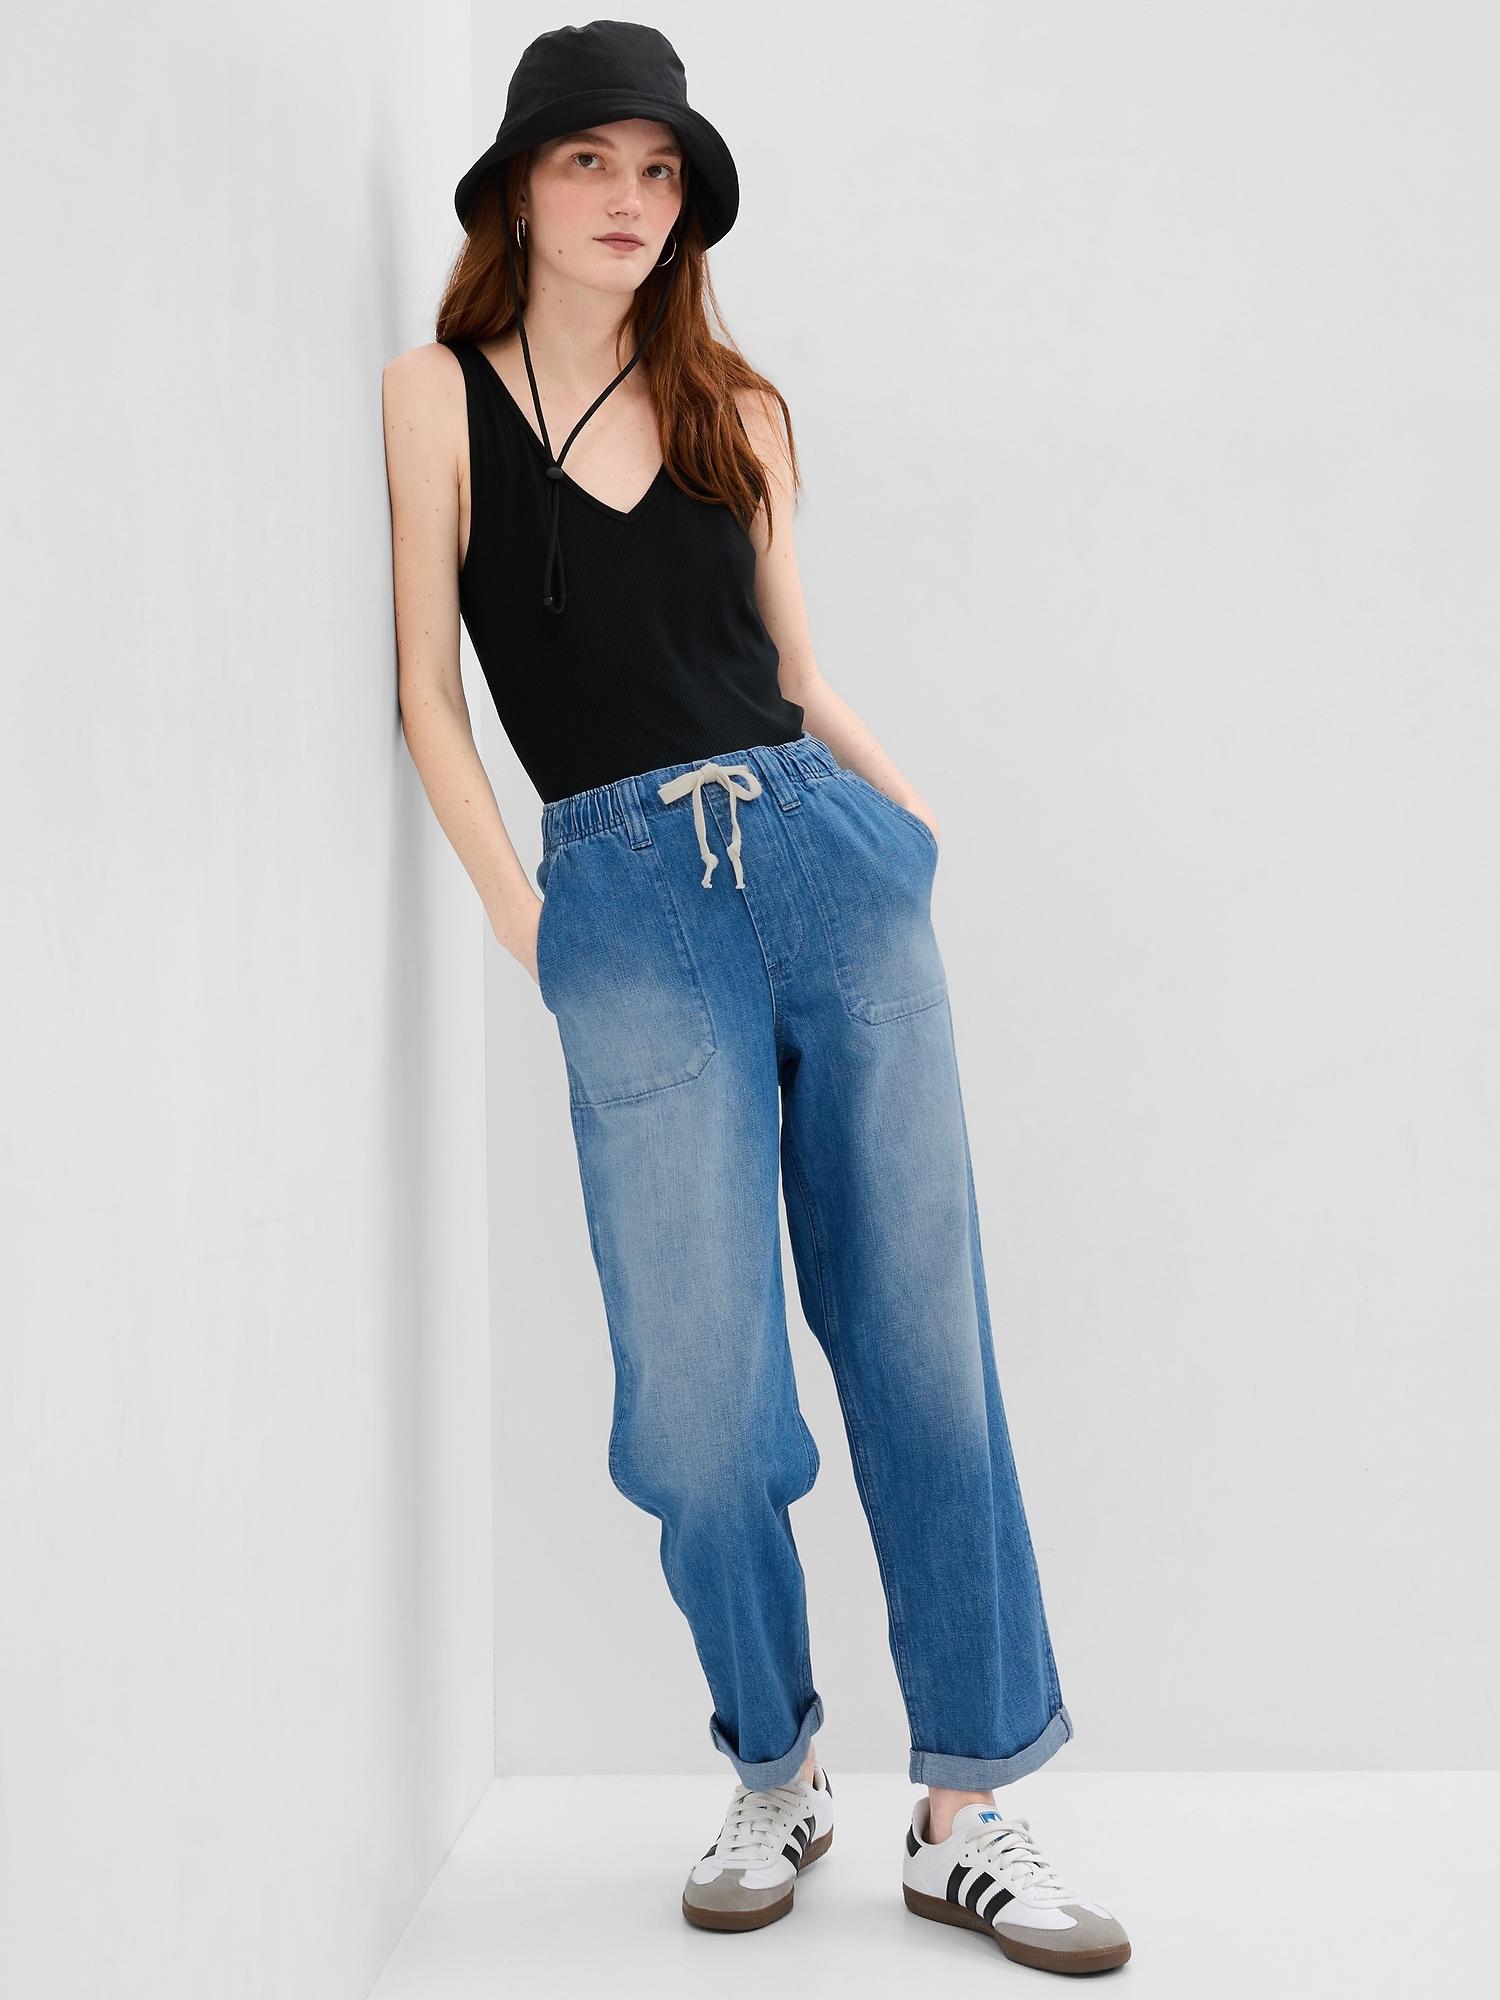 Mid Rise Easy Pull-On Jeans | Gap